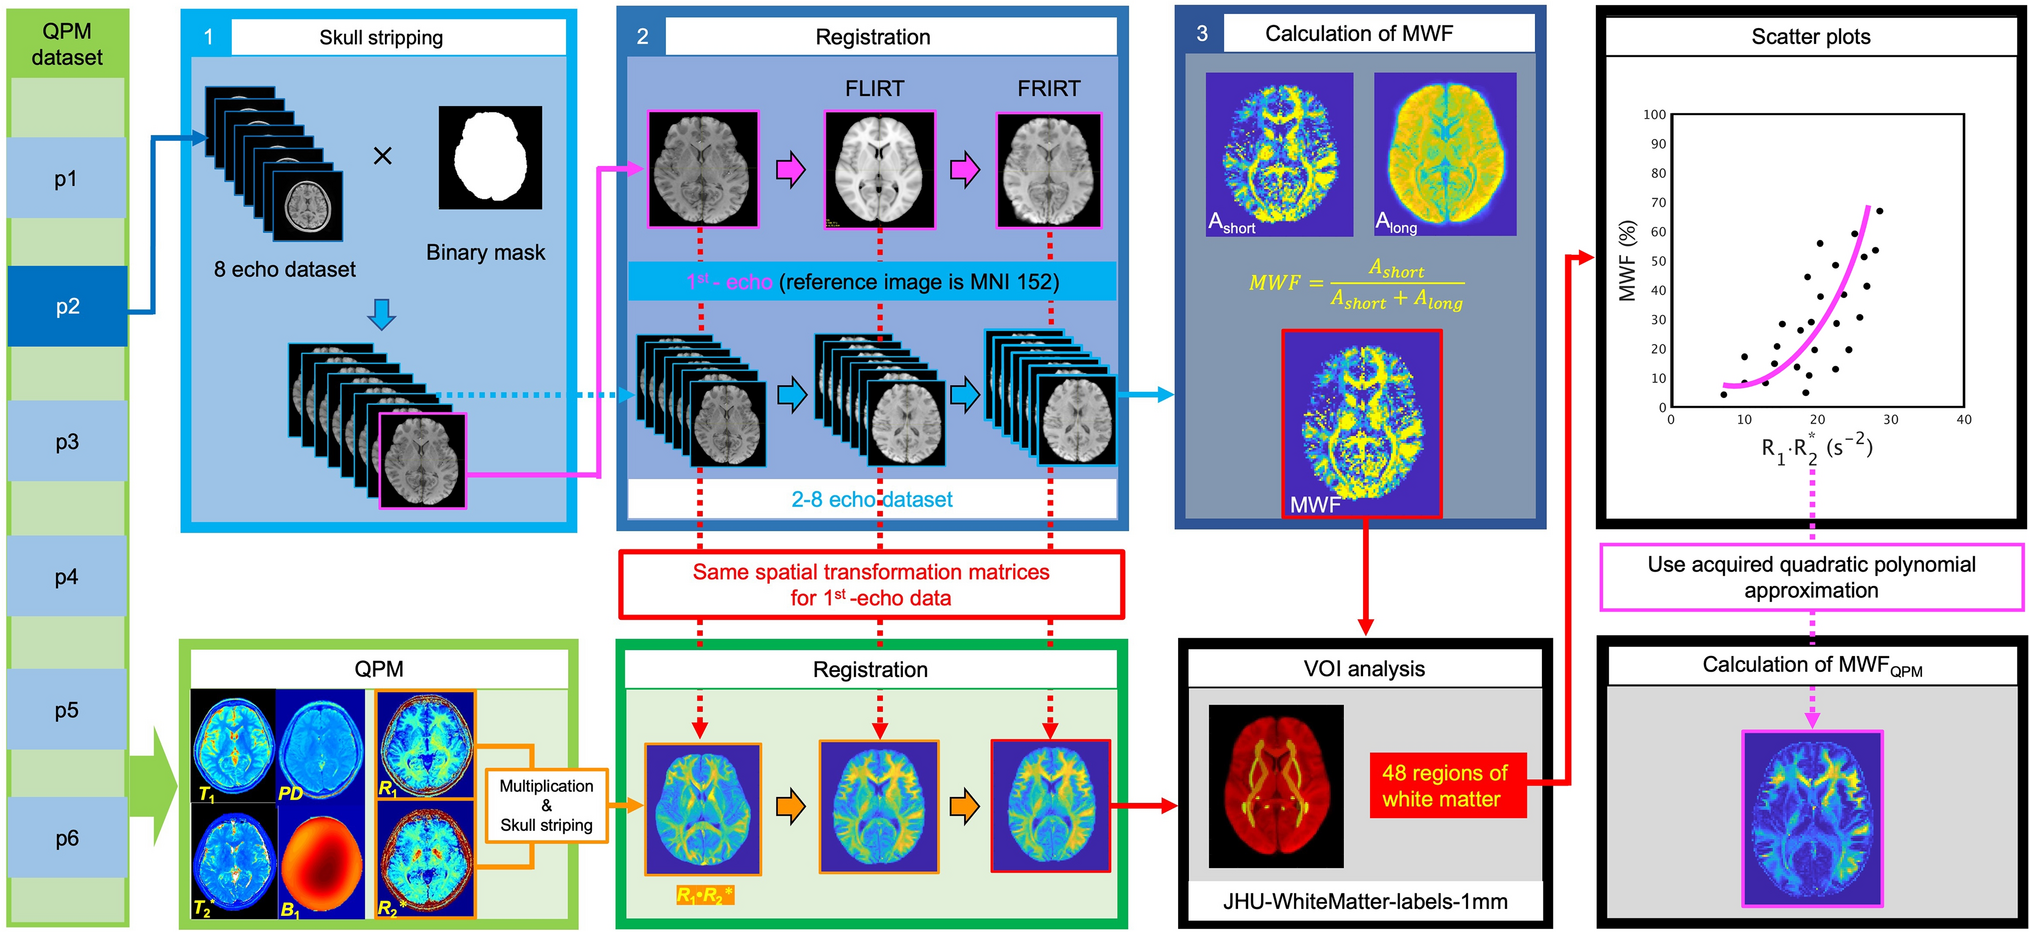 Conversion map from quantitative parameter mapping to myelin water fraction: comparison with R1·R2* and myelin water fraction in white matter